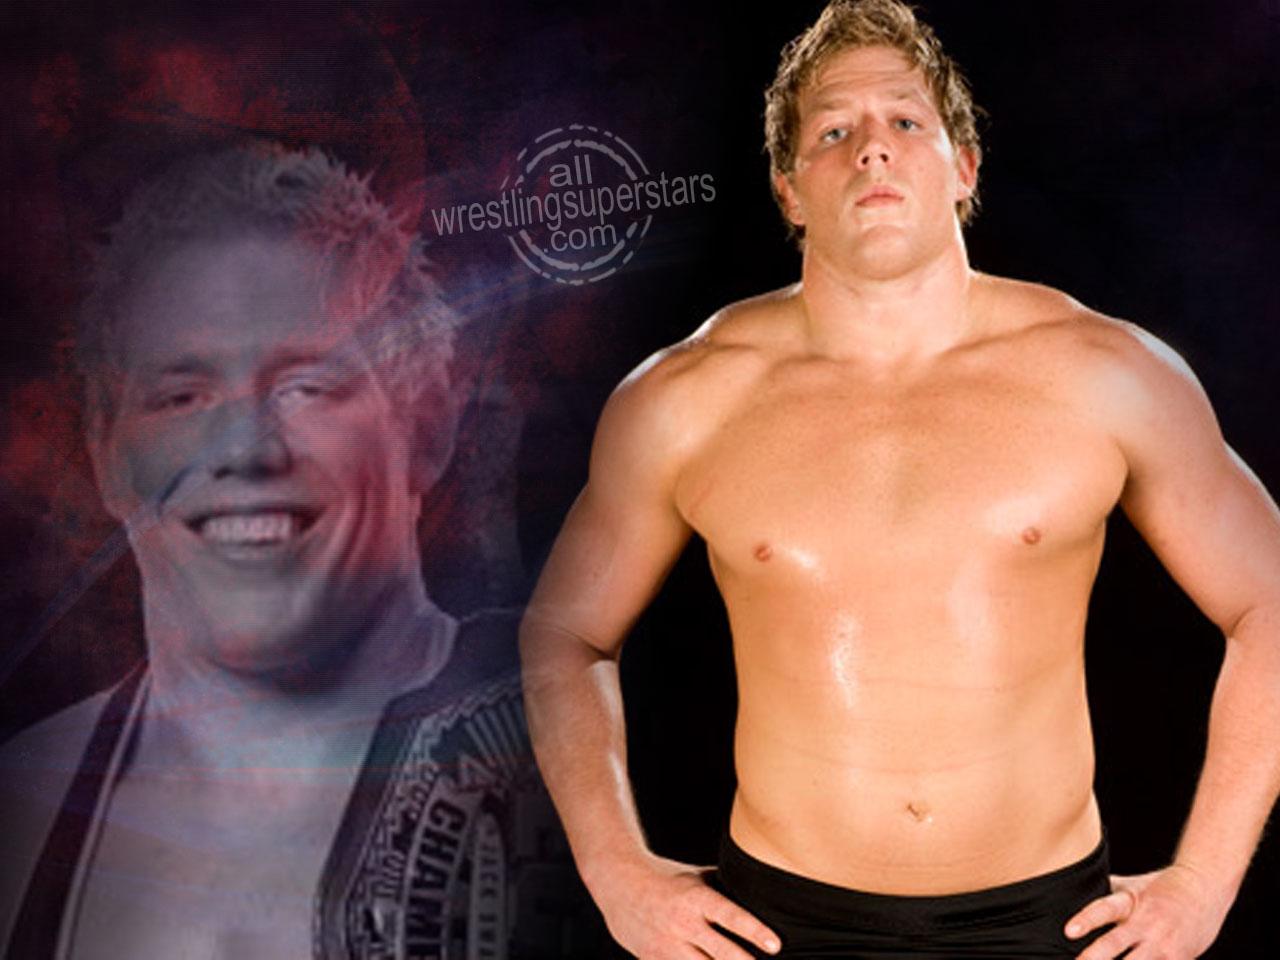 WWE WALLPAPERS: Jack swagger. wwe jack swagger. Jack swagger wrestler. Jack swagger picture. Jack swagger photo. Jack swagger image. jake hager. wwe. wwe picture